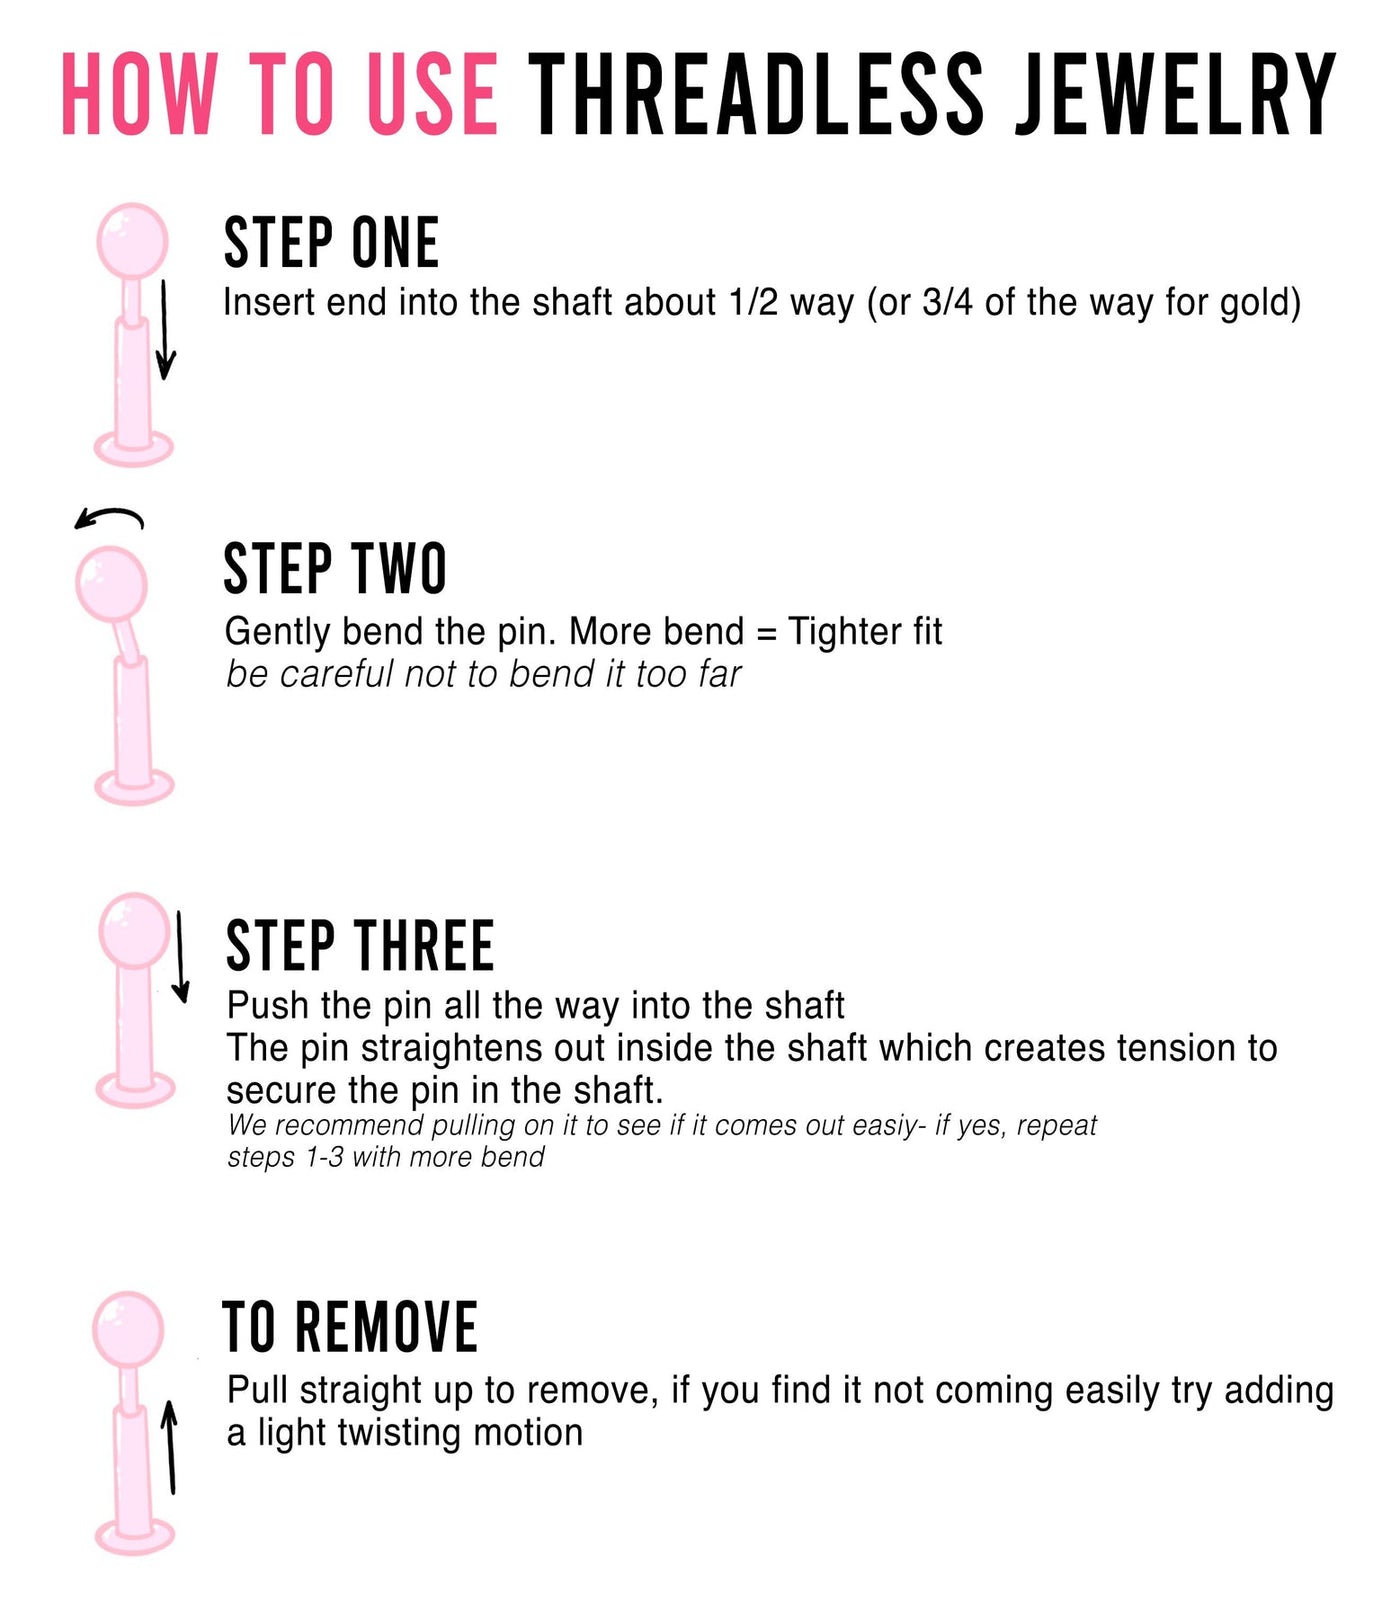 How to remove and insert not threaded jewelry for starters